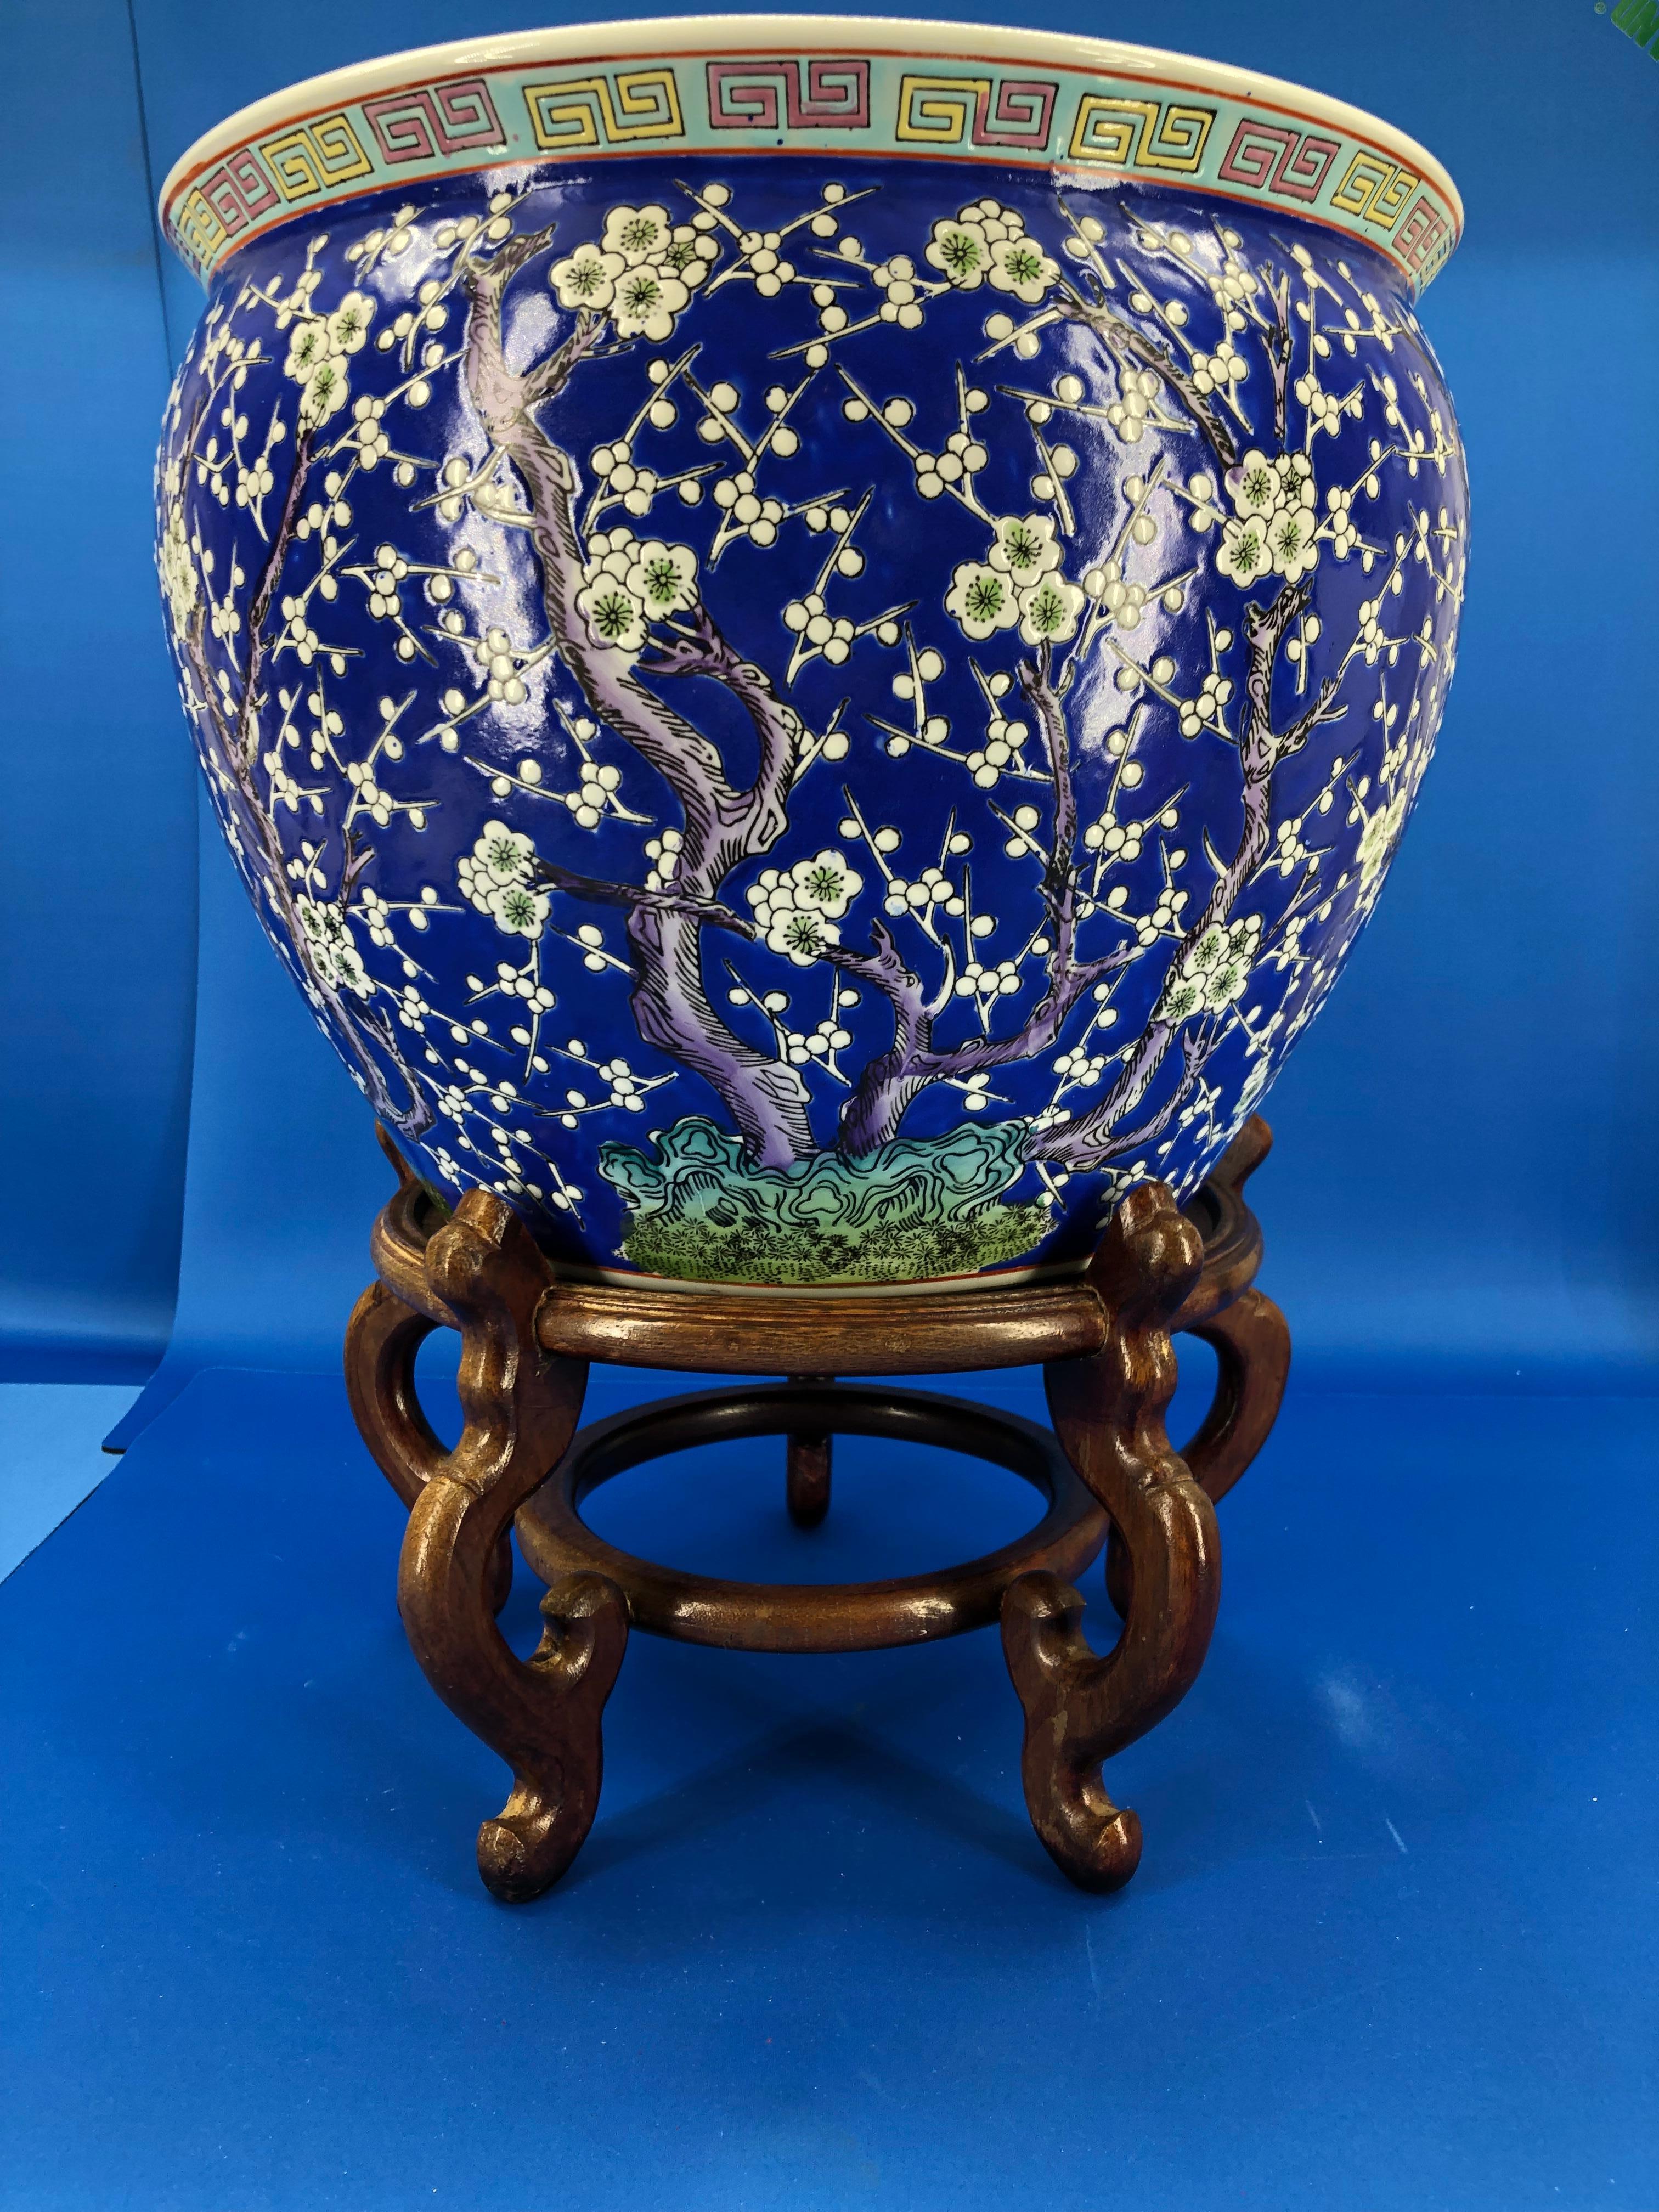 20th Century Large Chinese Blue Decorated Porcelain Jardinieres Planter on Wooden Stand